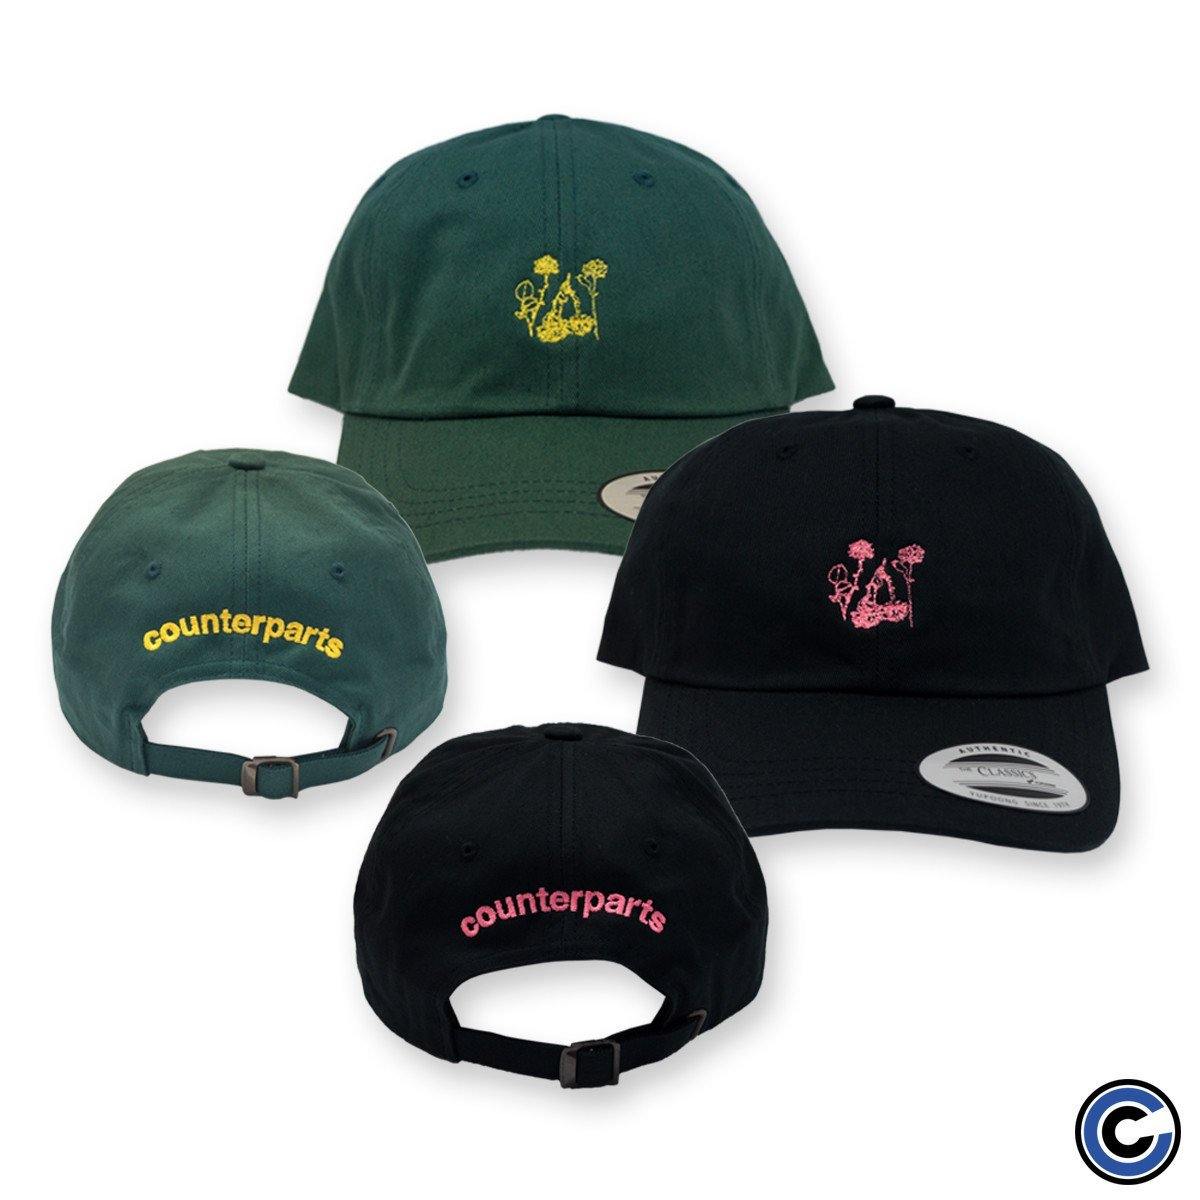 Buy – Counterparts "Dead Flower" Hat – Band & Music Merch – Cold Cuts Merch